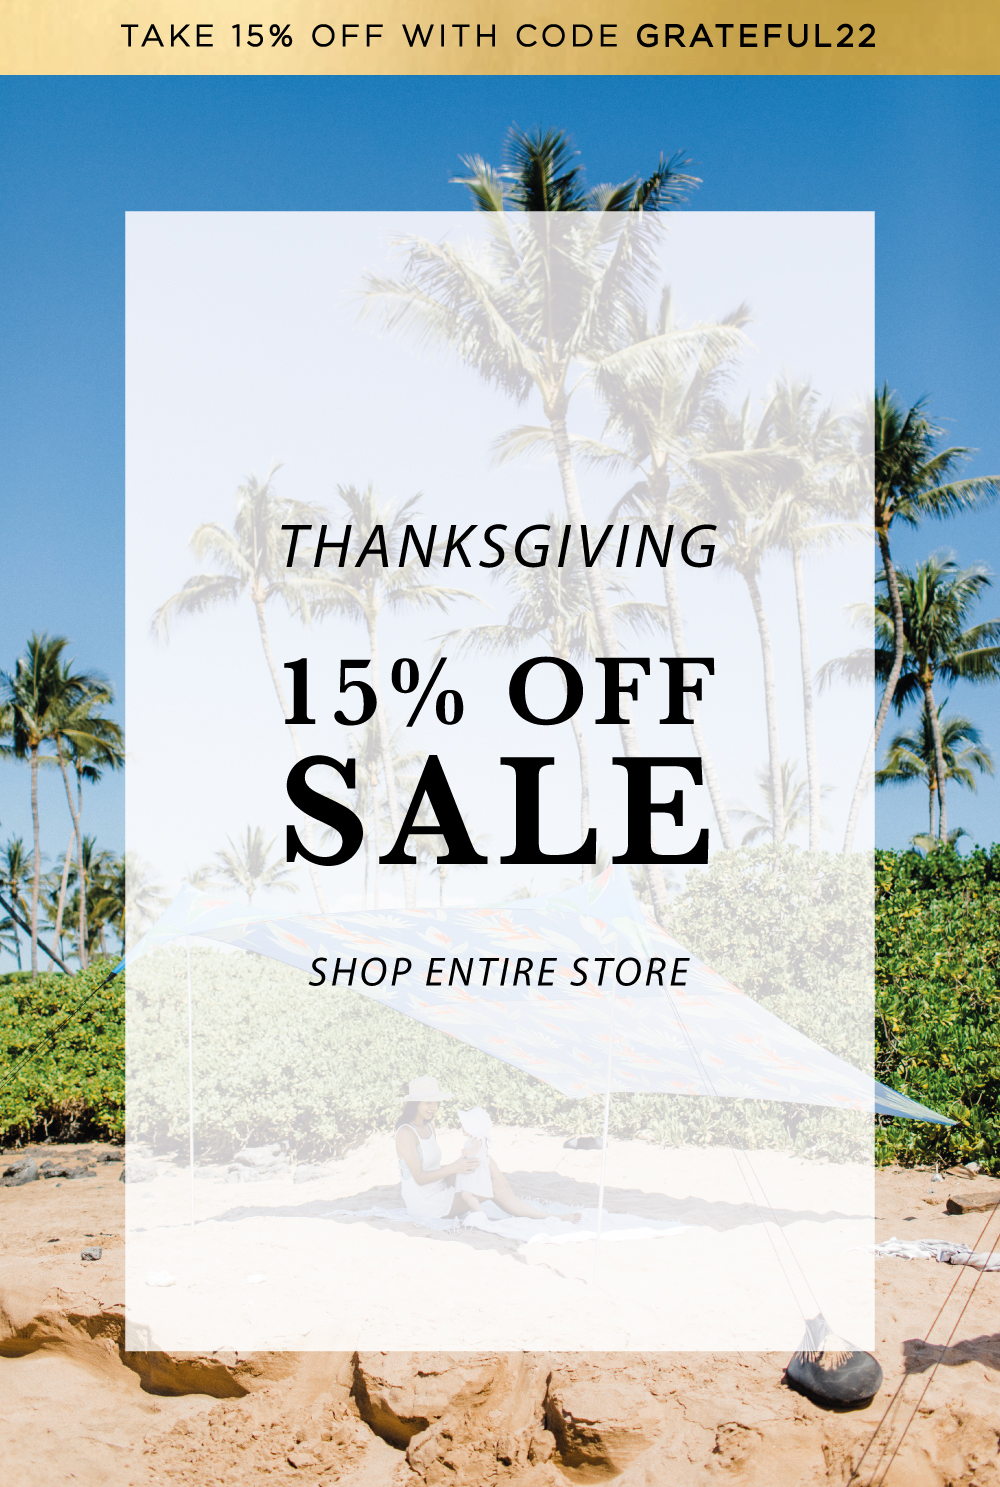 Taxe 154 orr wiTHCEEEEE % %xd? THANKSGIVING 15% OFF SALE SHOP ENTIRE STORE 